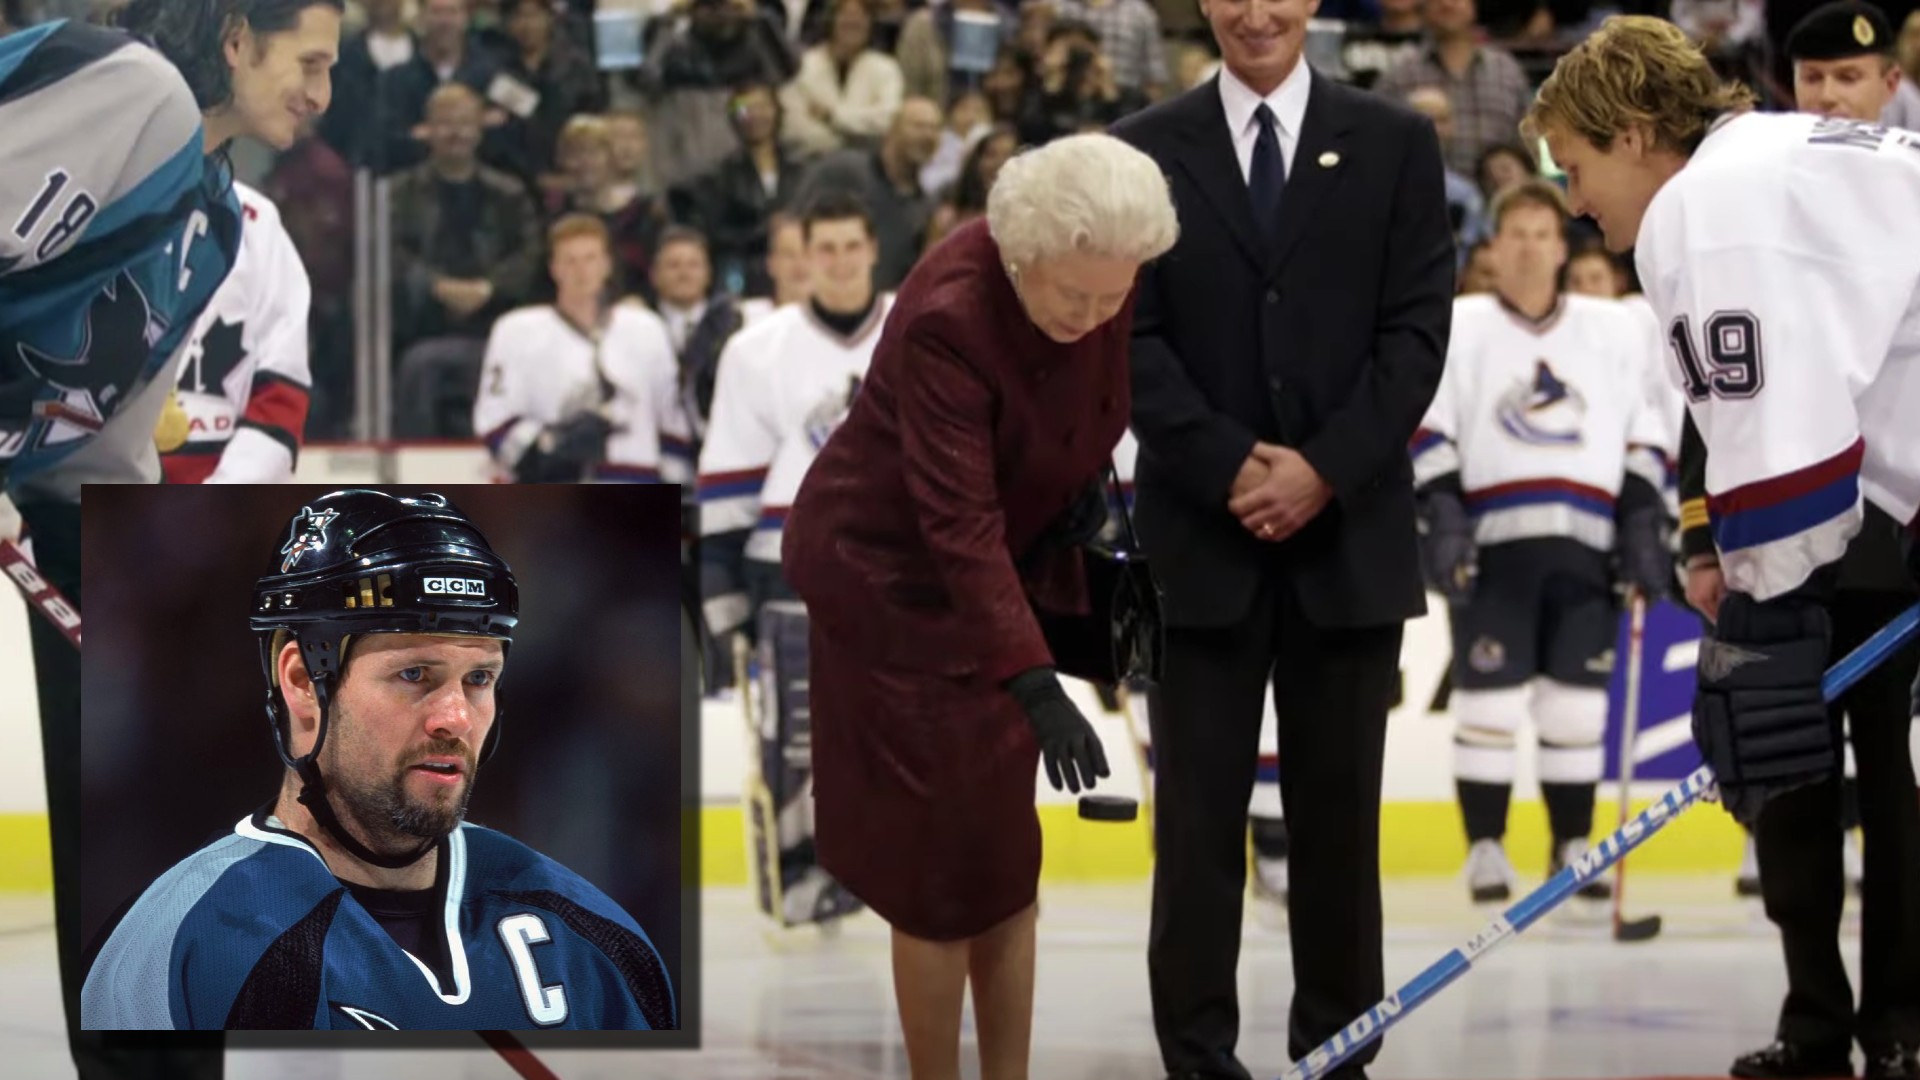 The time Owen Nolan refused to attend a game because Queen Elizabeth was there

